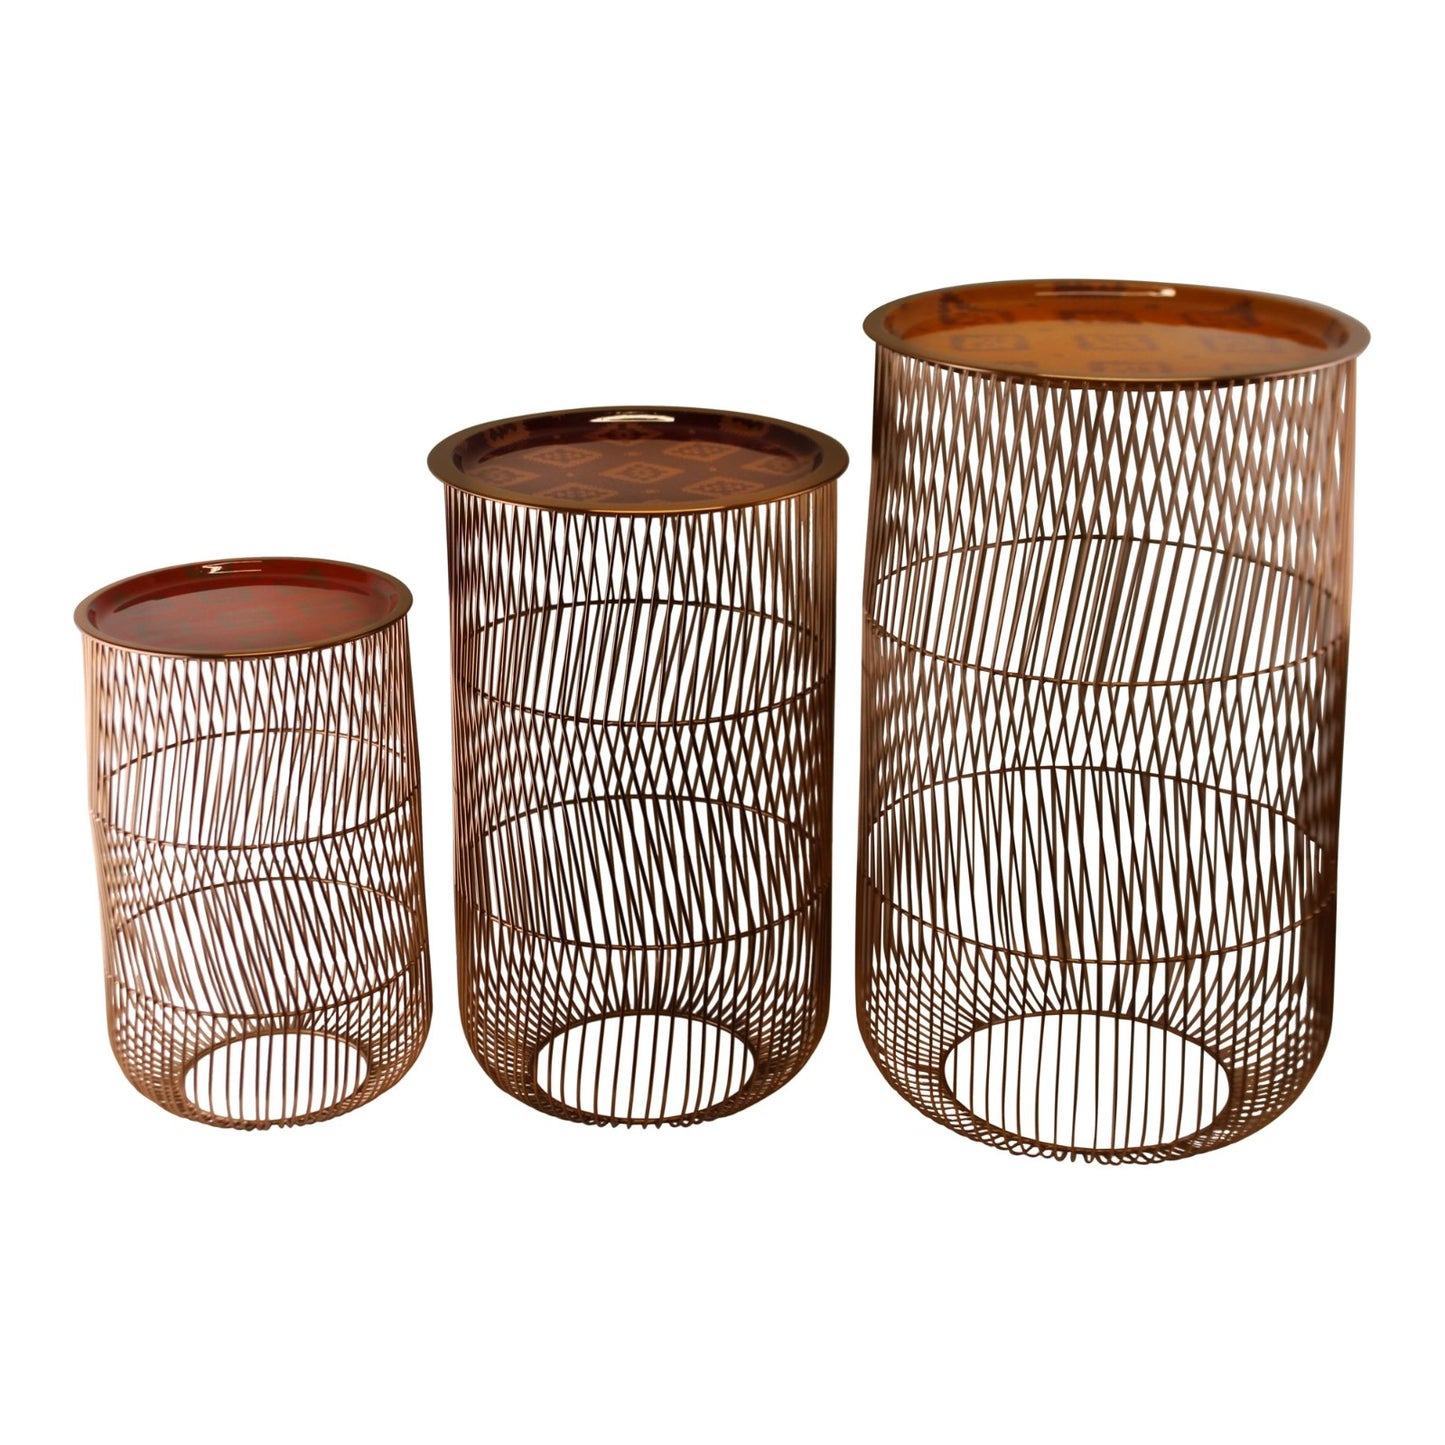 Set of 3 Kasbah Wire Tables, Design A